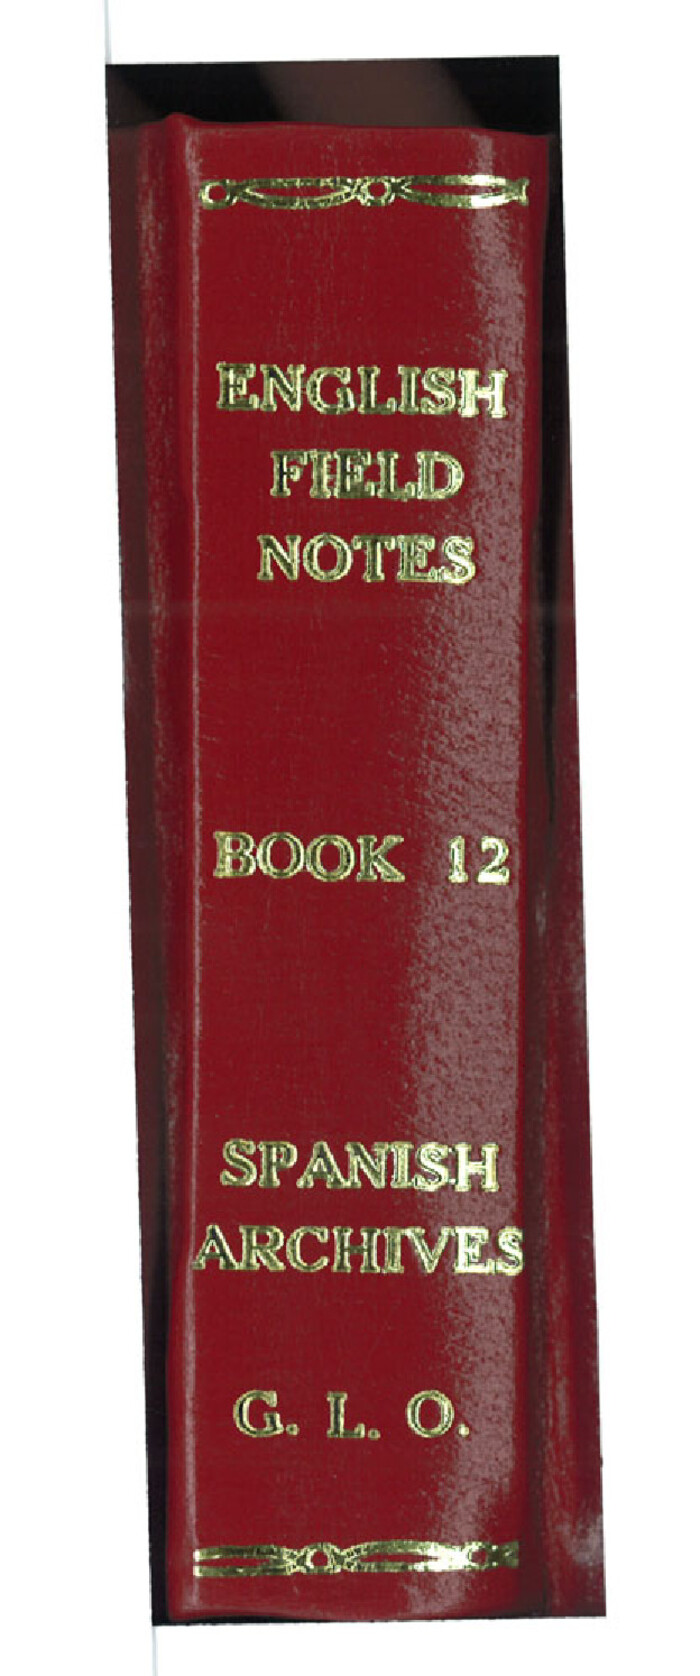 96538, English Field Notes of the Spanish Archives - Book 12, Historical Volumes